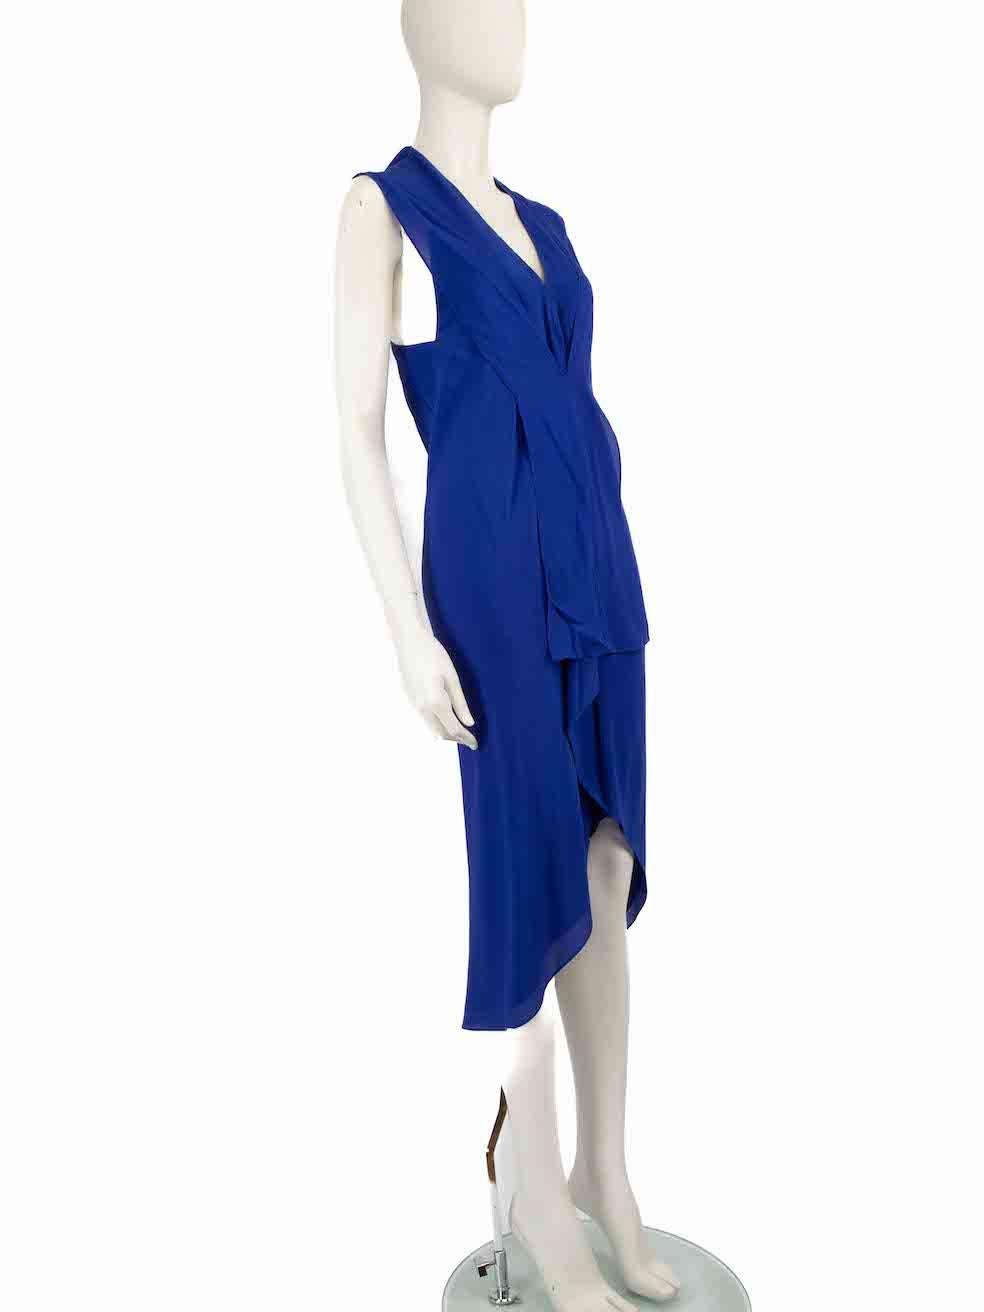 CONDITION is Very good. Minimal wear to the dress is evident. The interior lining of this dress shows minimal wear at the front, centre, and sleeves, with discolouration marks and there is a mark to the left neck tie on this used Diane Von